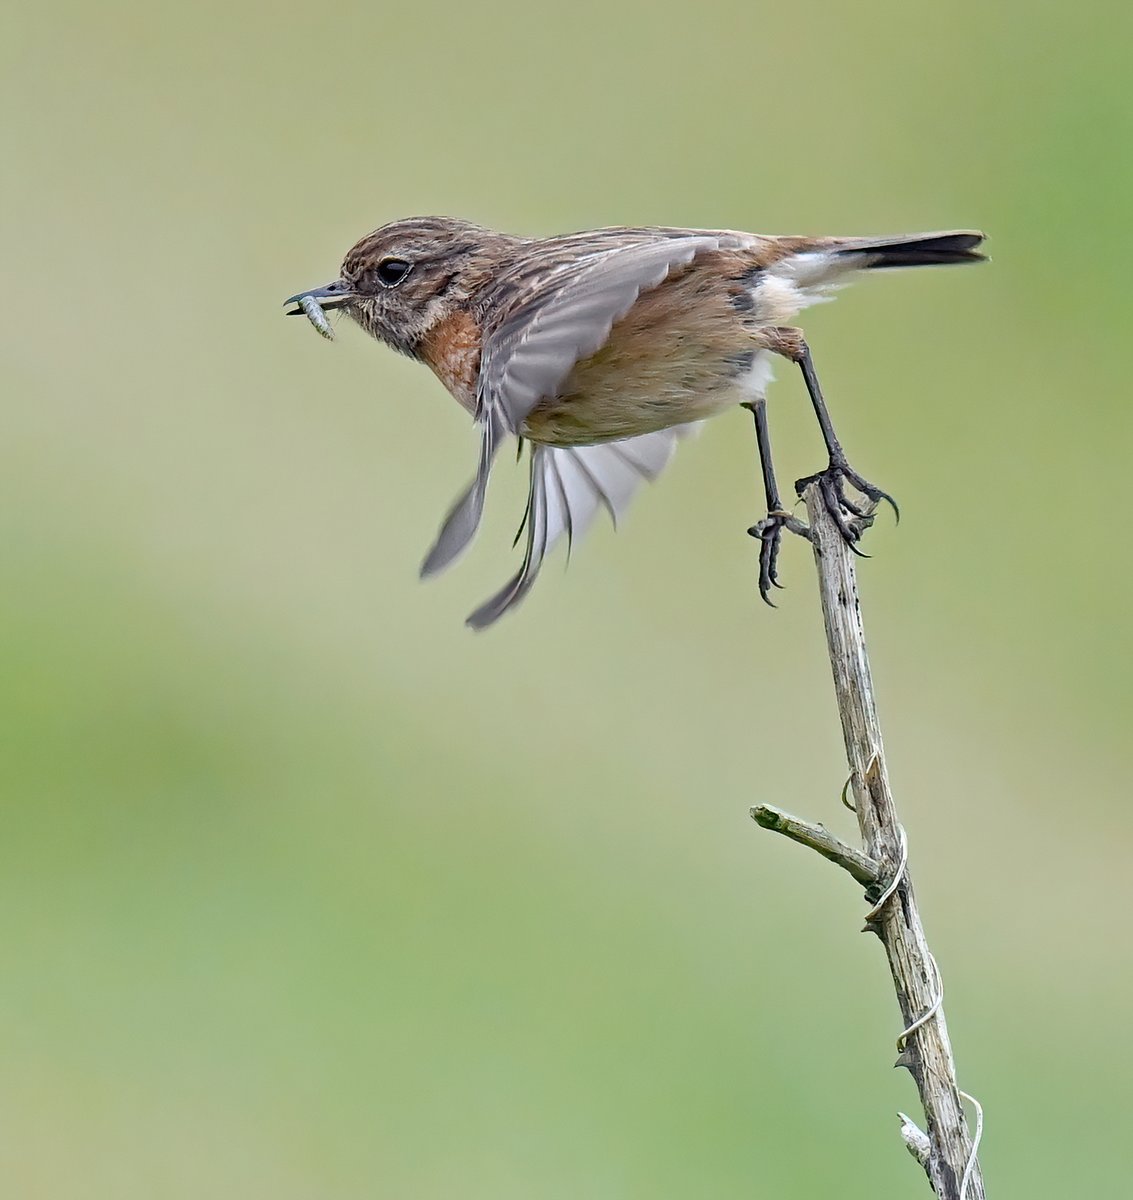 Female Stonechat on the move! 😍 Taken at Praa Sands in Cornwall. 🐦